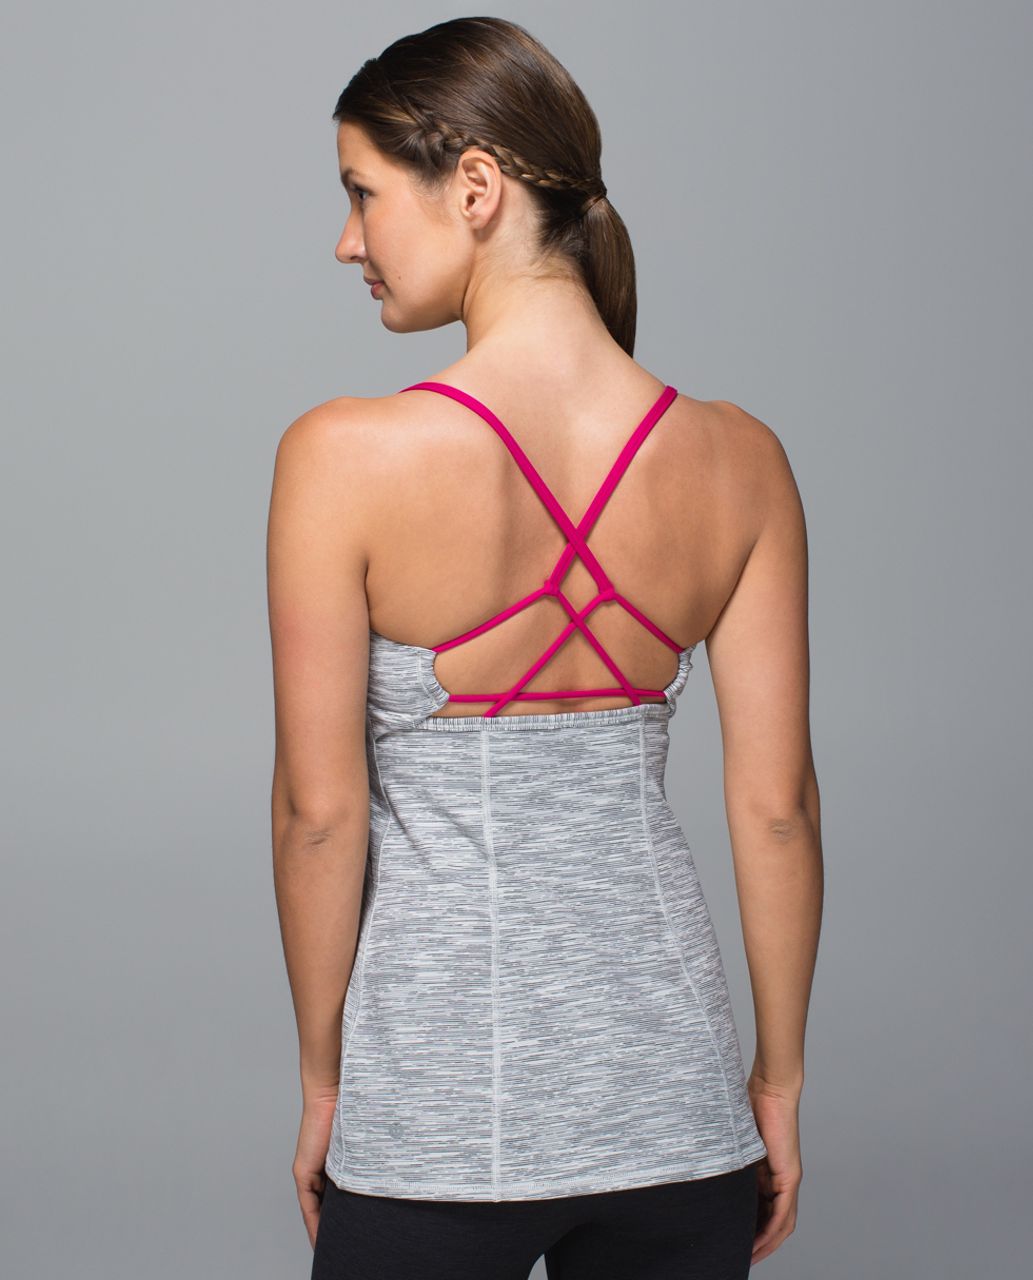 Lululemon Dancing Warrior Tank - Wee Are From Space Silver Spoon / Jewelled Magenta